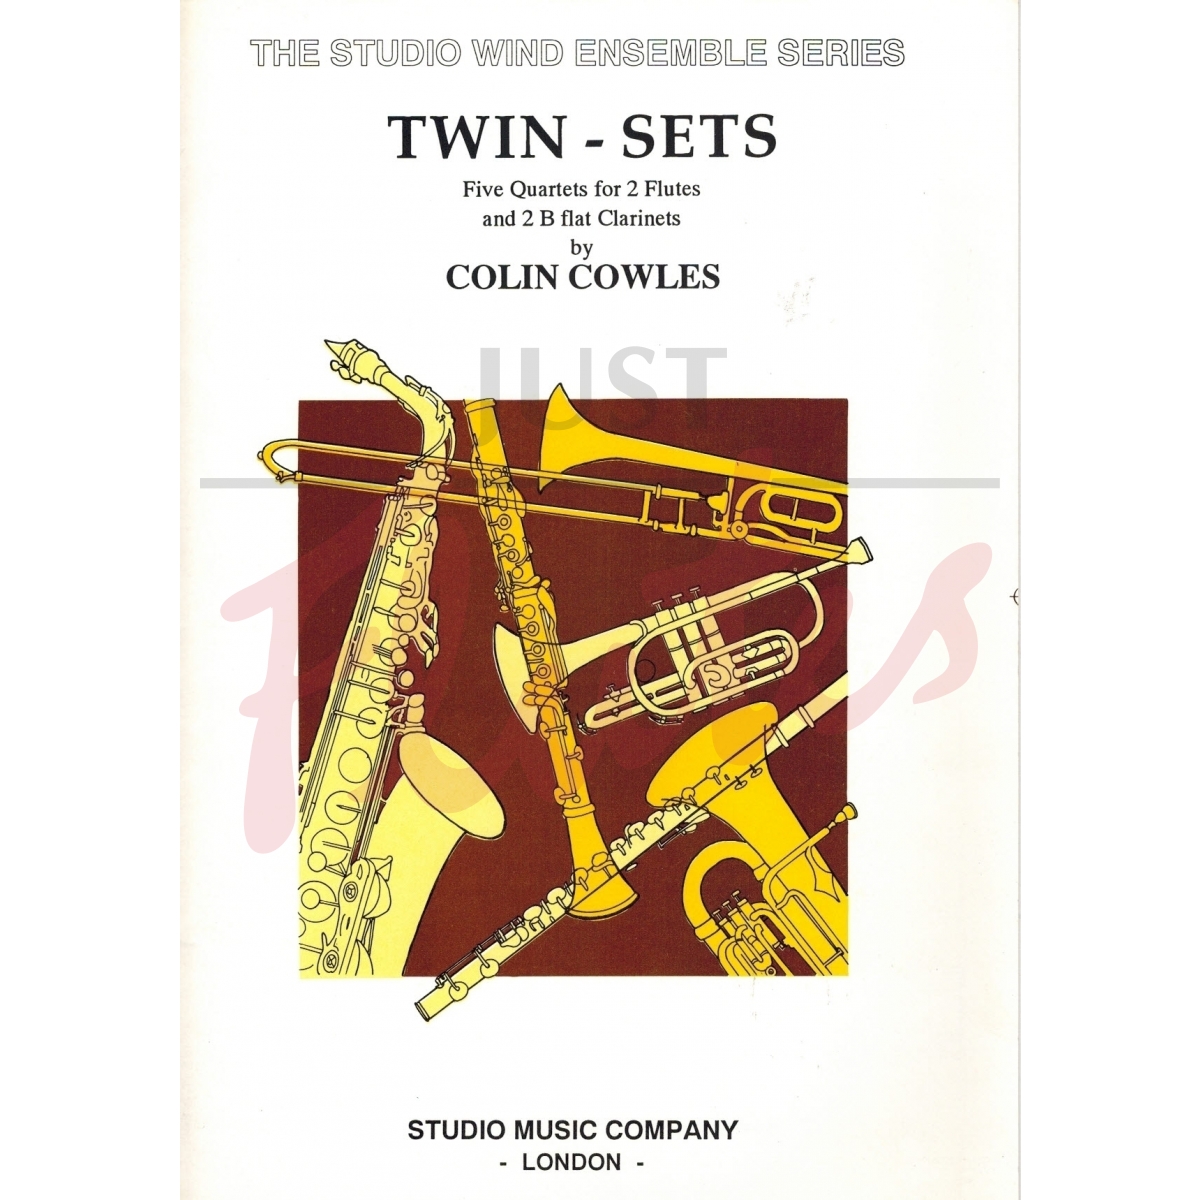 Twin-Sets for 2 Flutes and Clarinets